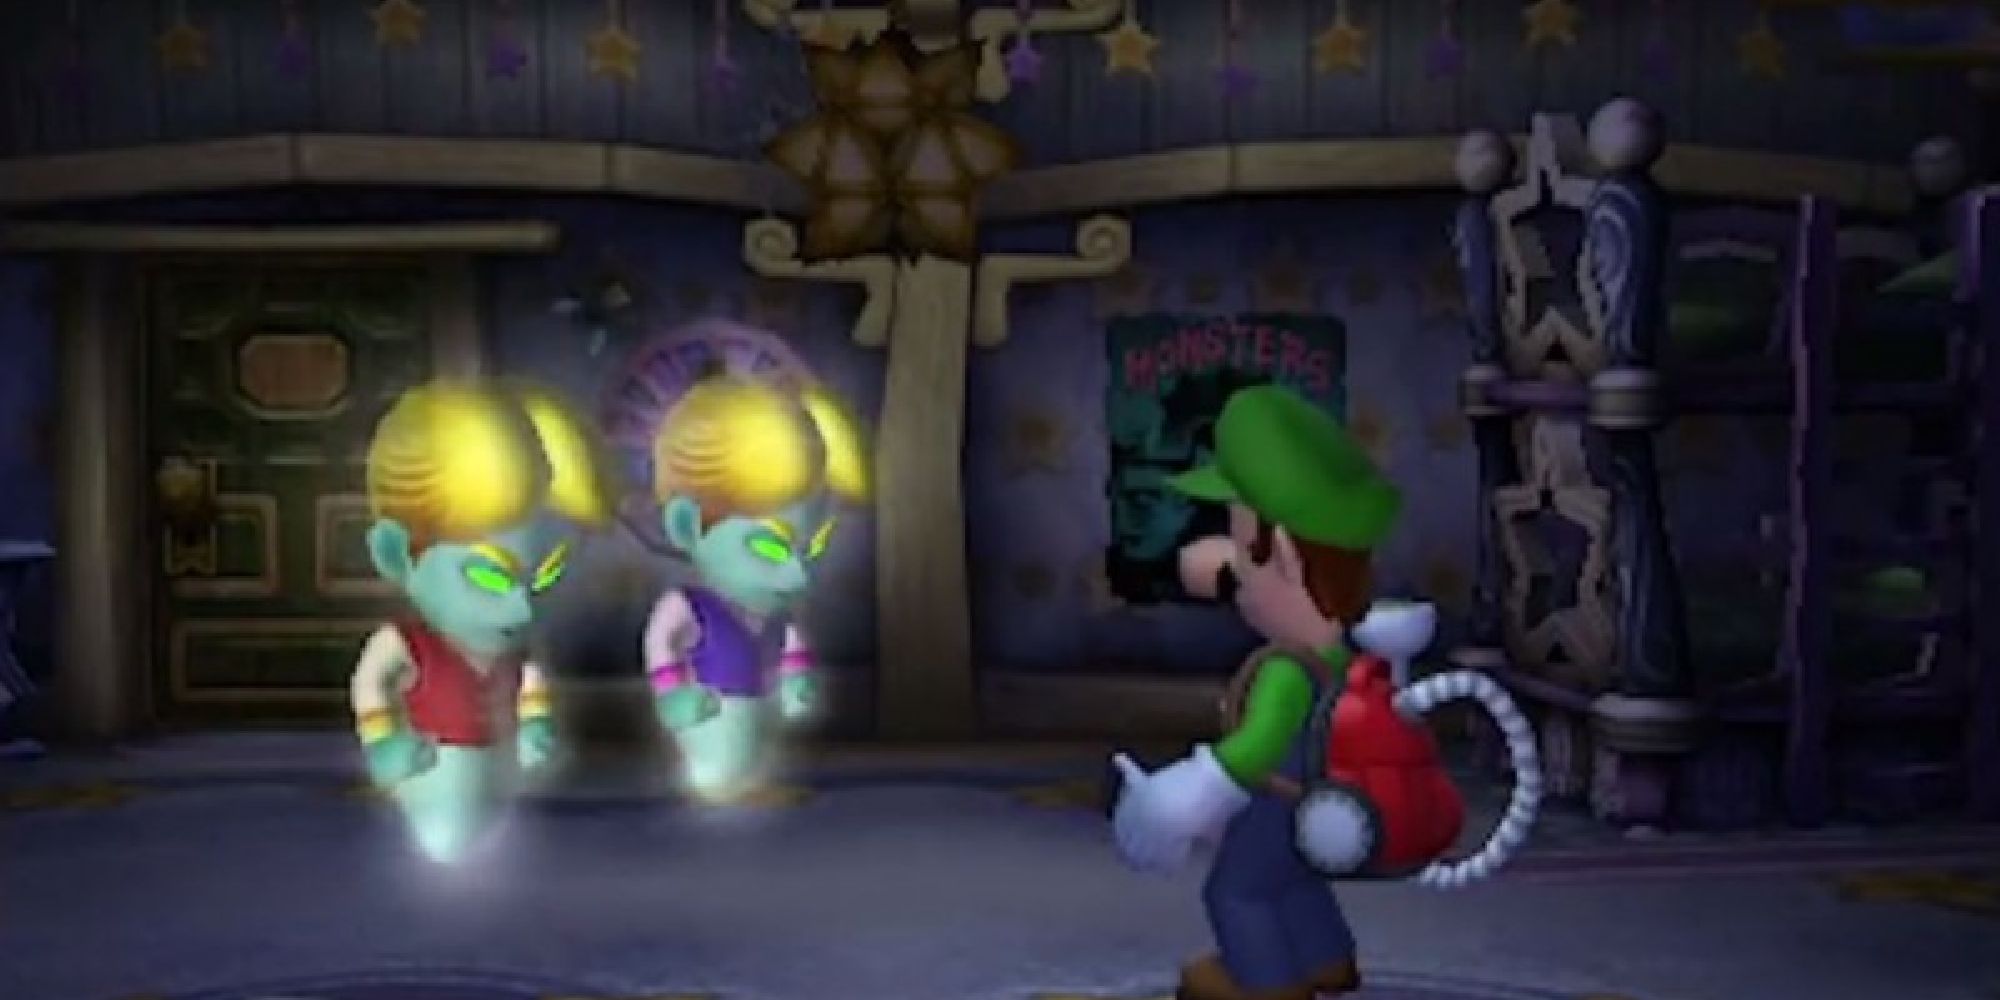 Luigi addressing the ghosts of two surly looking teens. 